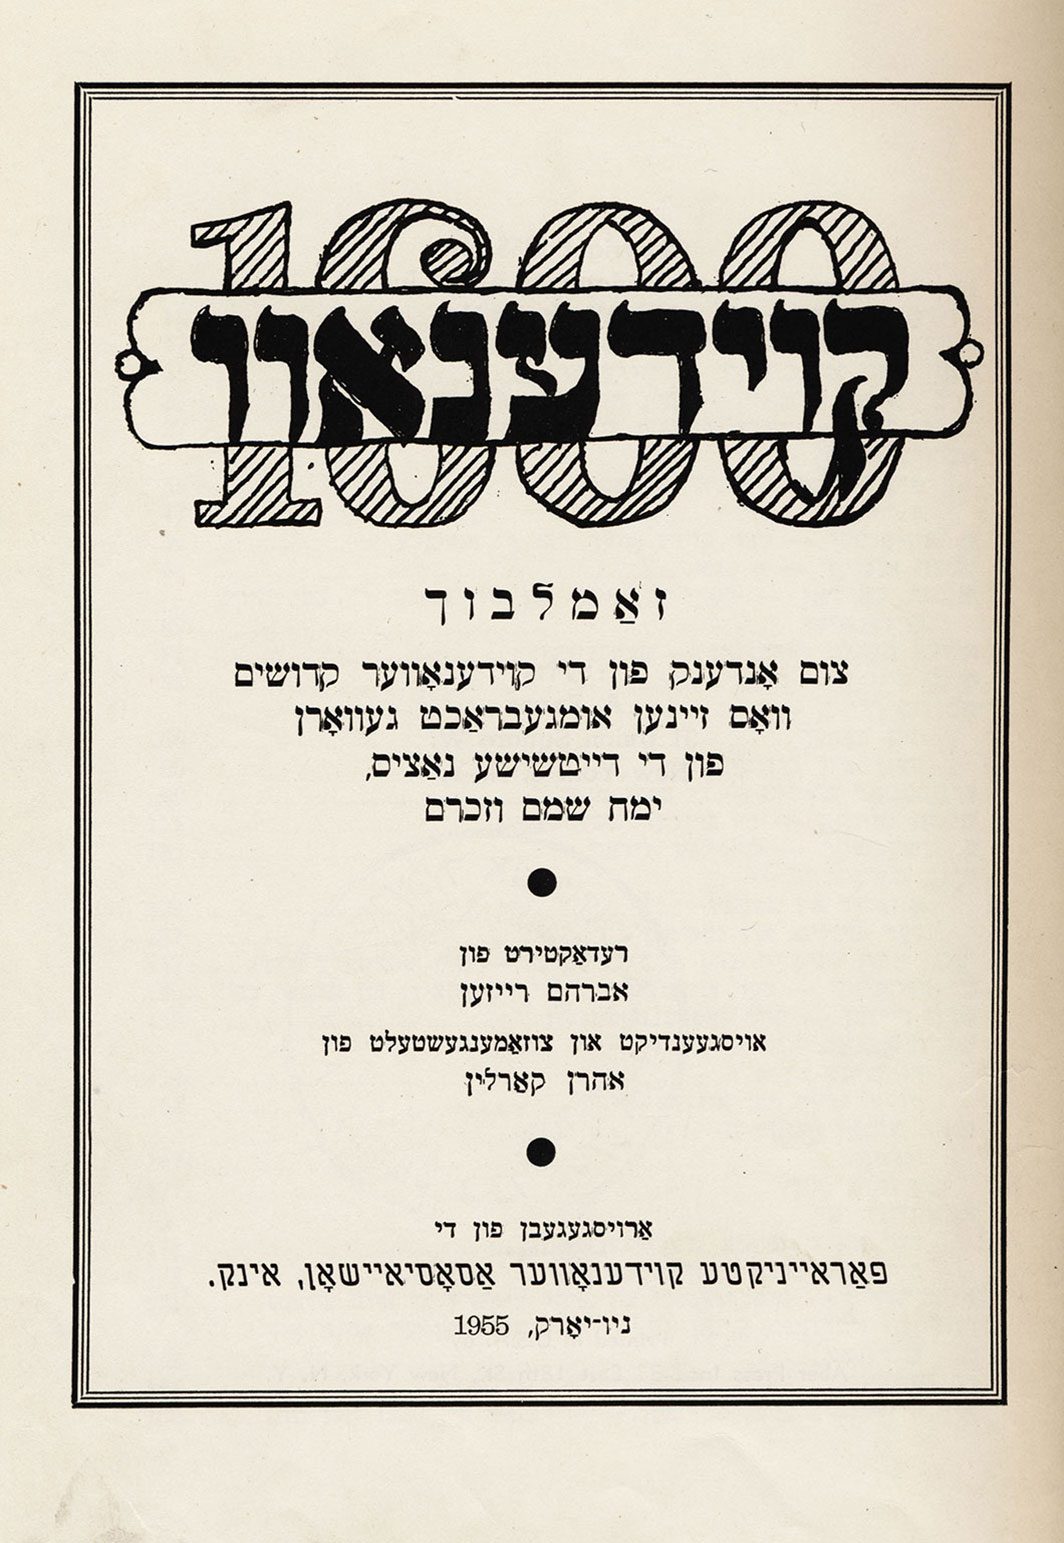 Cover of a memorial book for a Jewish community